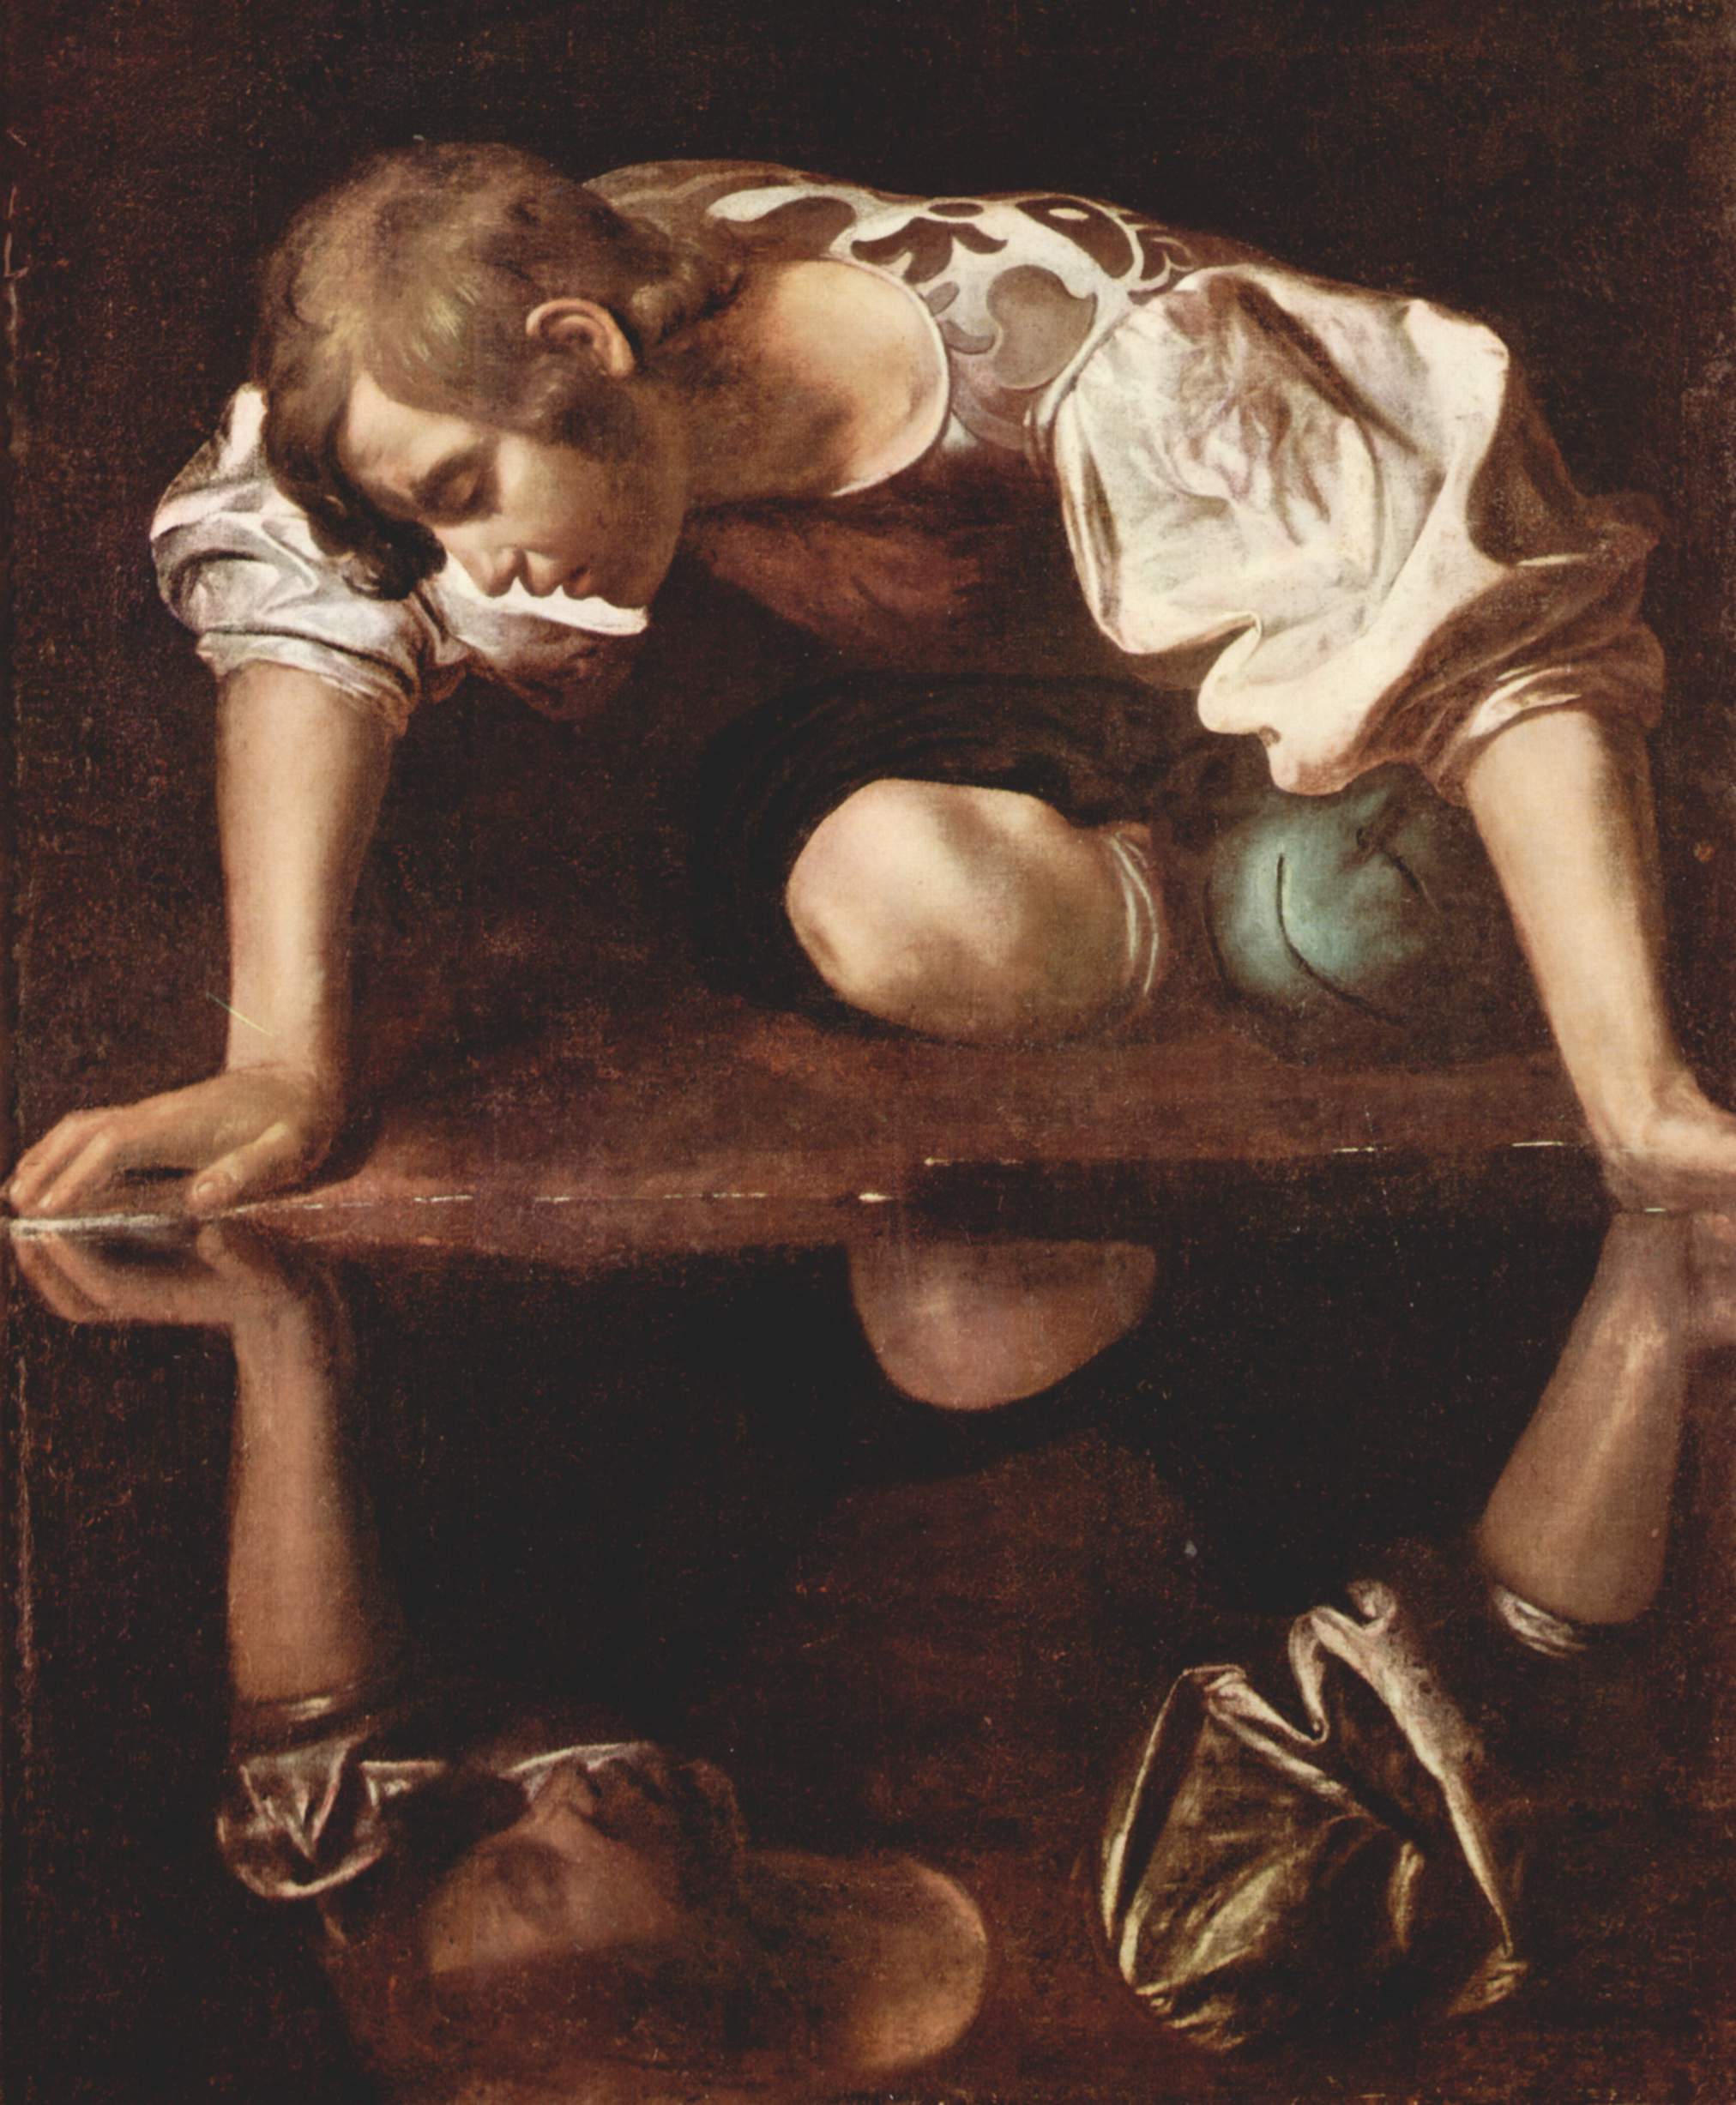 Reflection on Narcissus: Narcissus on Reflection | Psychology Today